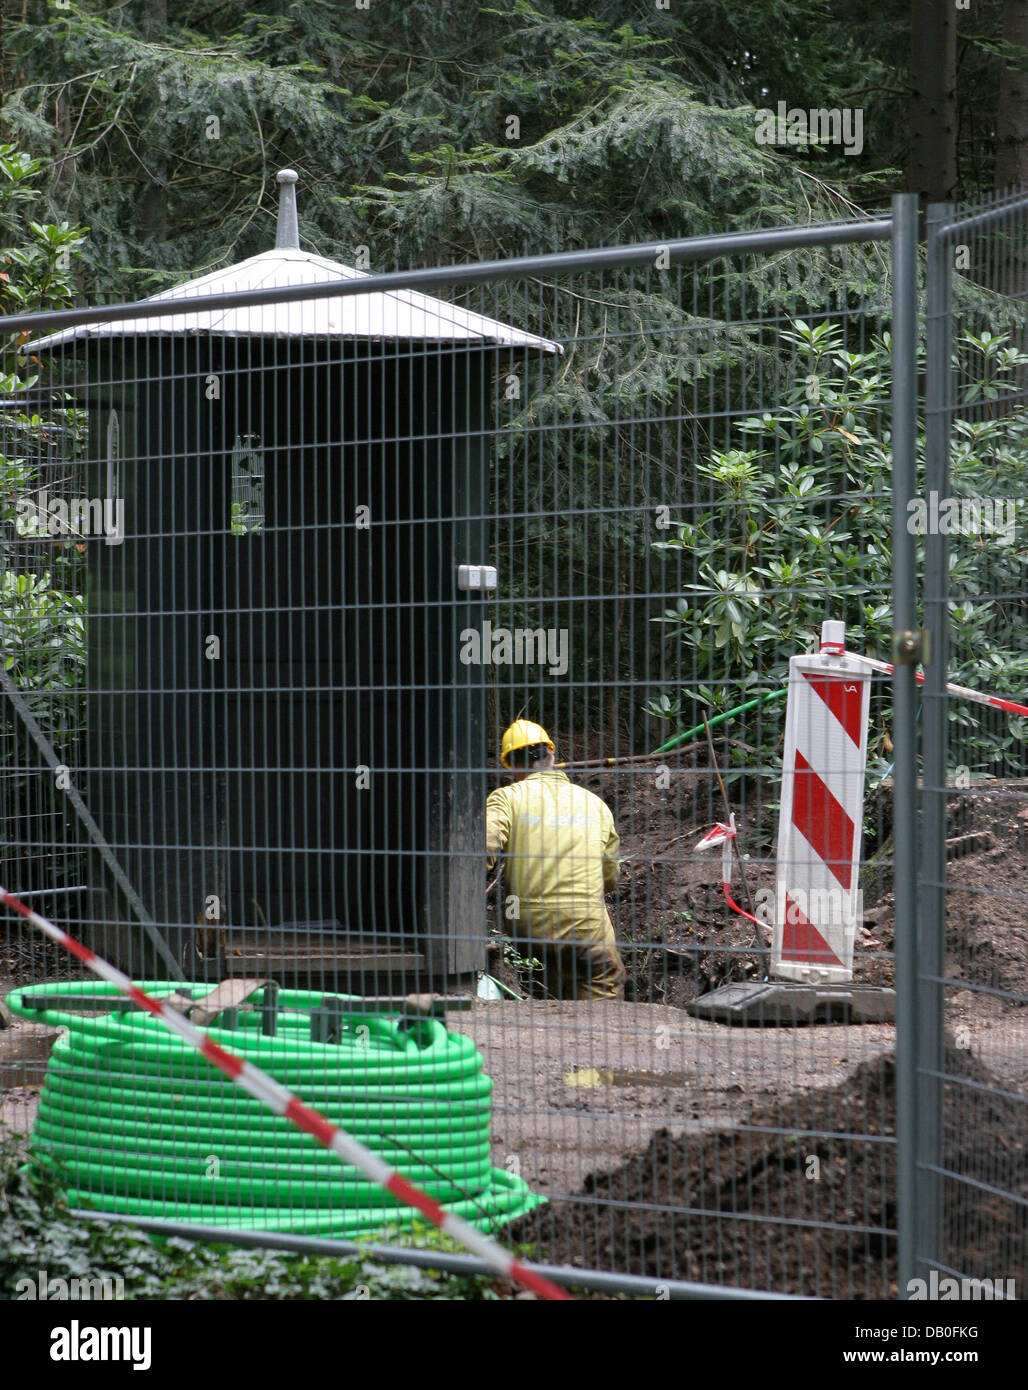 Staff works on the fence around Drakenstein castle and its park near Lage Vuursche, the Netherlands, 20 August 2007. A new fence is under construction around the grounds of the Drakenstein castle which causes lots of criticism of the peolple who live in the nearby village. Passers-by feel like a 'wall' is being set up to protect Queen Beatrix of the Netherlands who might use Draken Stock Photo